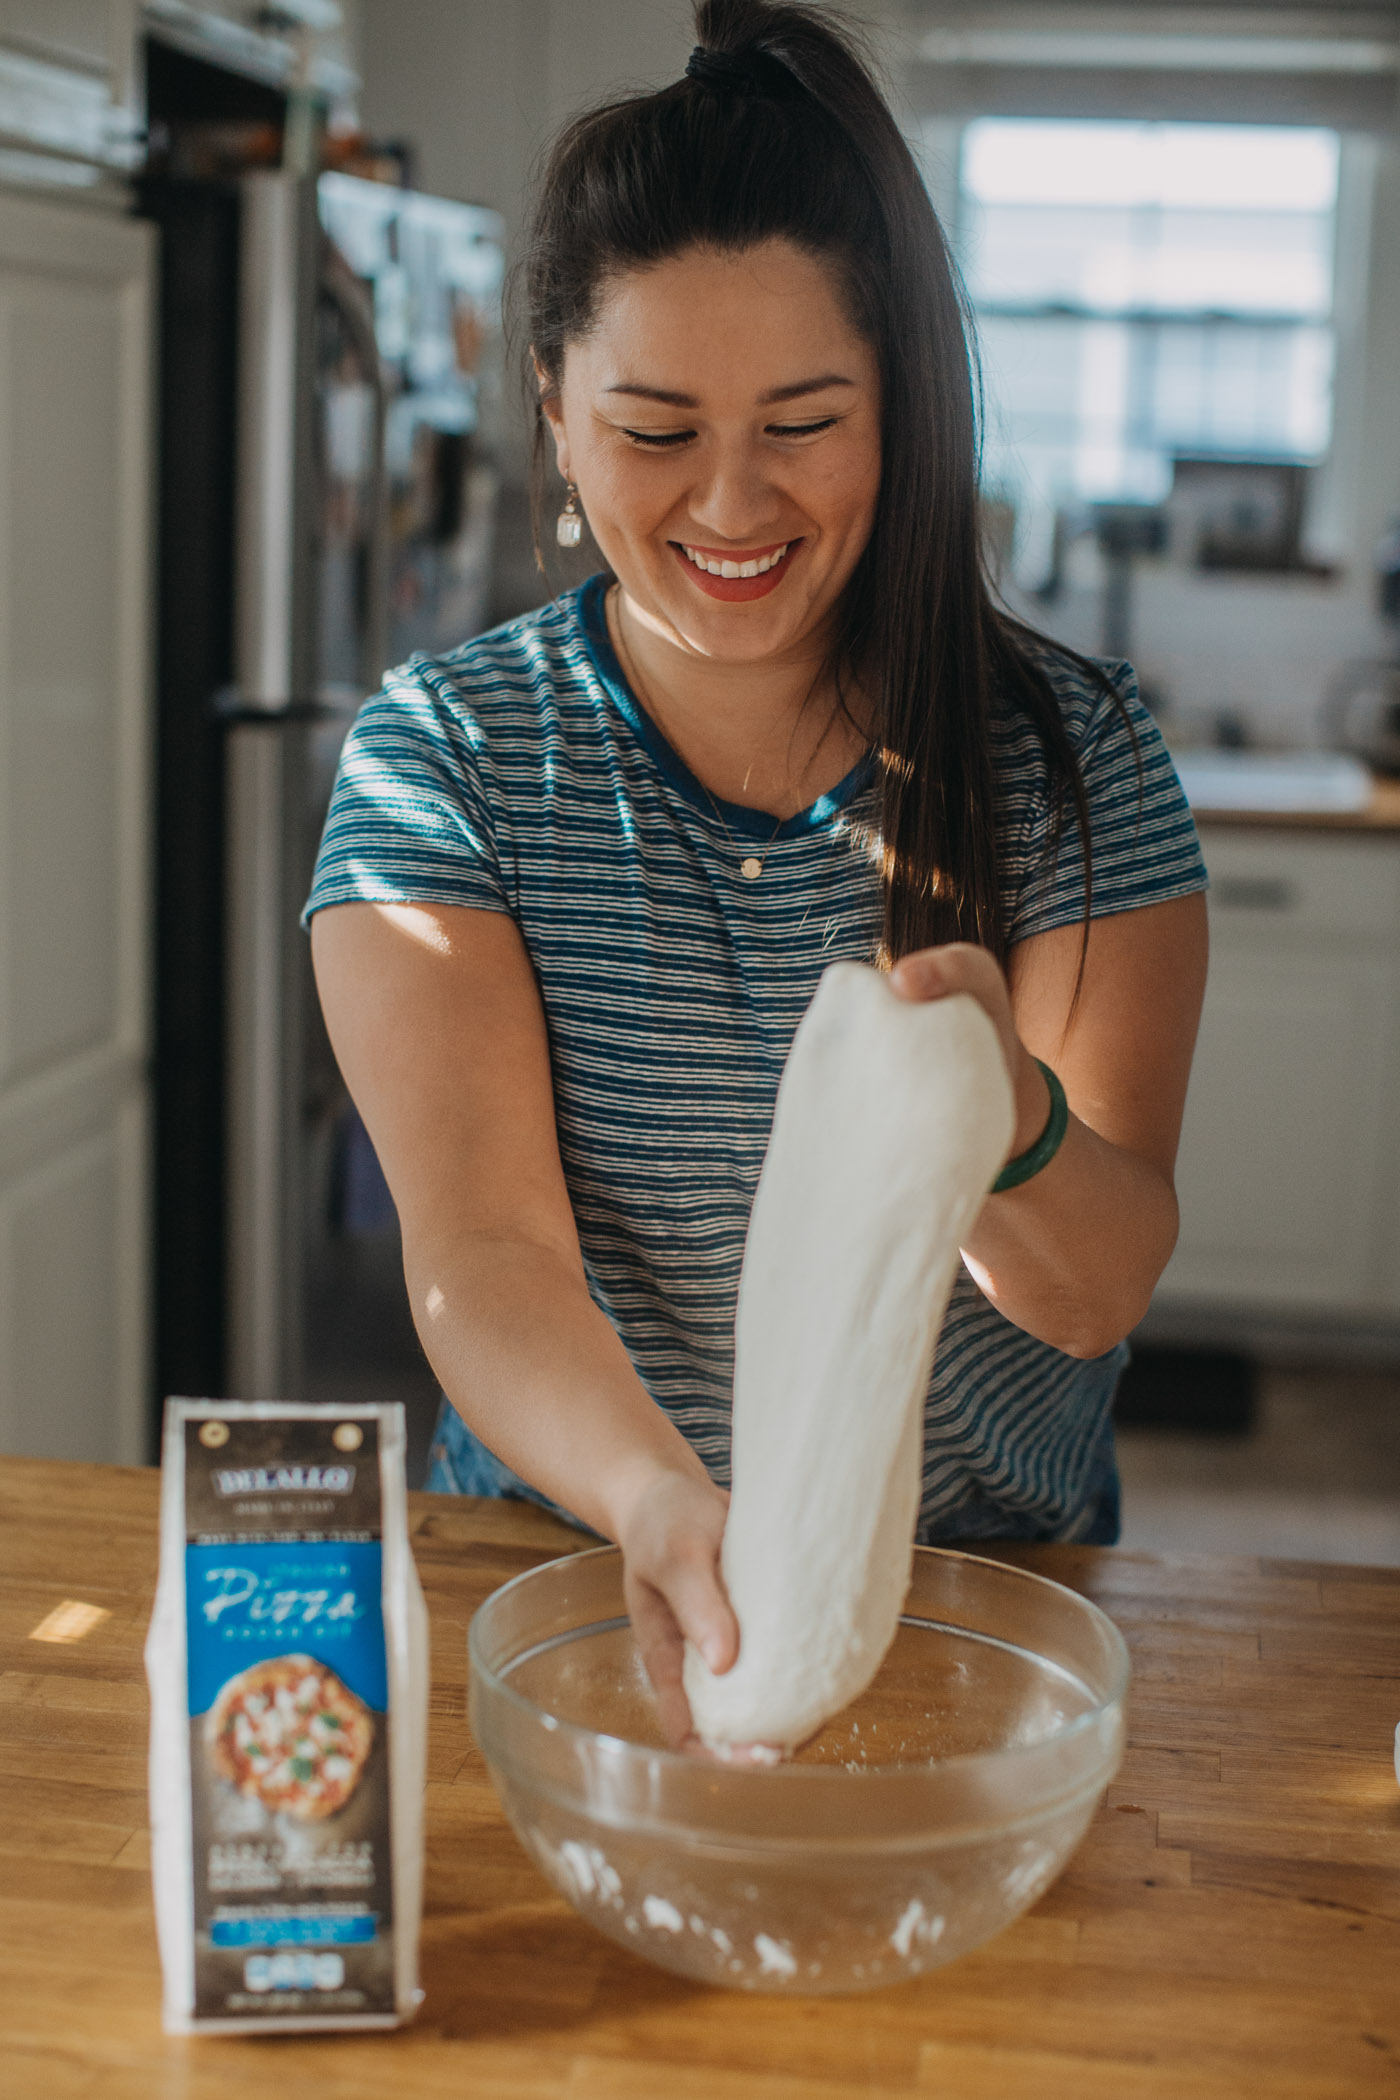 Woman in blue shirt pulling homemade pizza dough out of clear glass bowl. Bowl is sitting next to DeLallo pizza dough kit package.